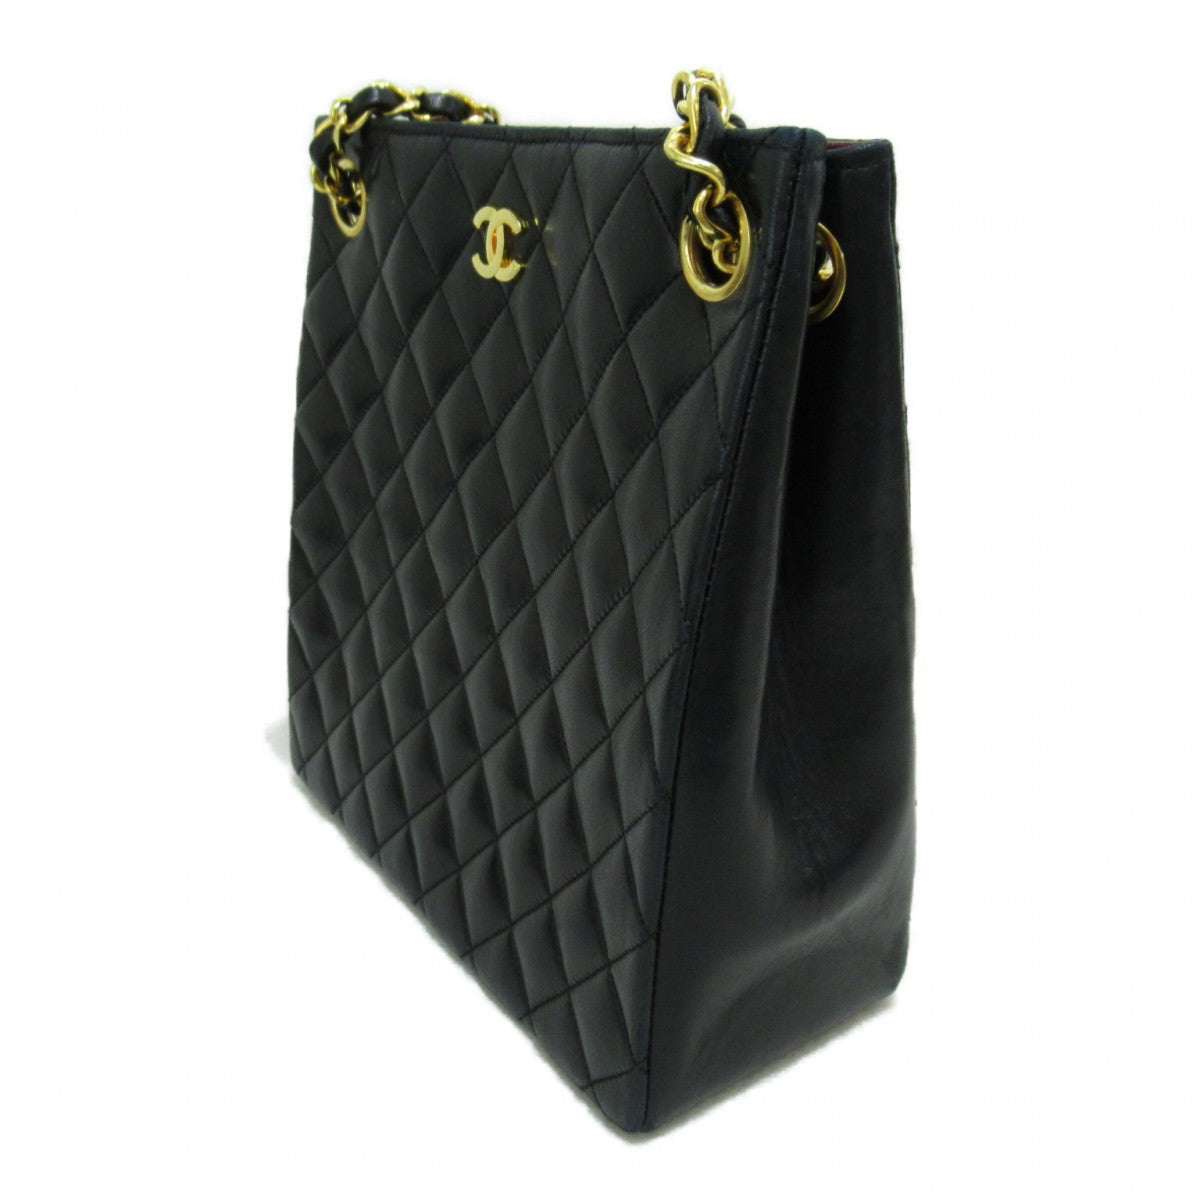 CC Quilted Leather Chain Tote